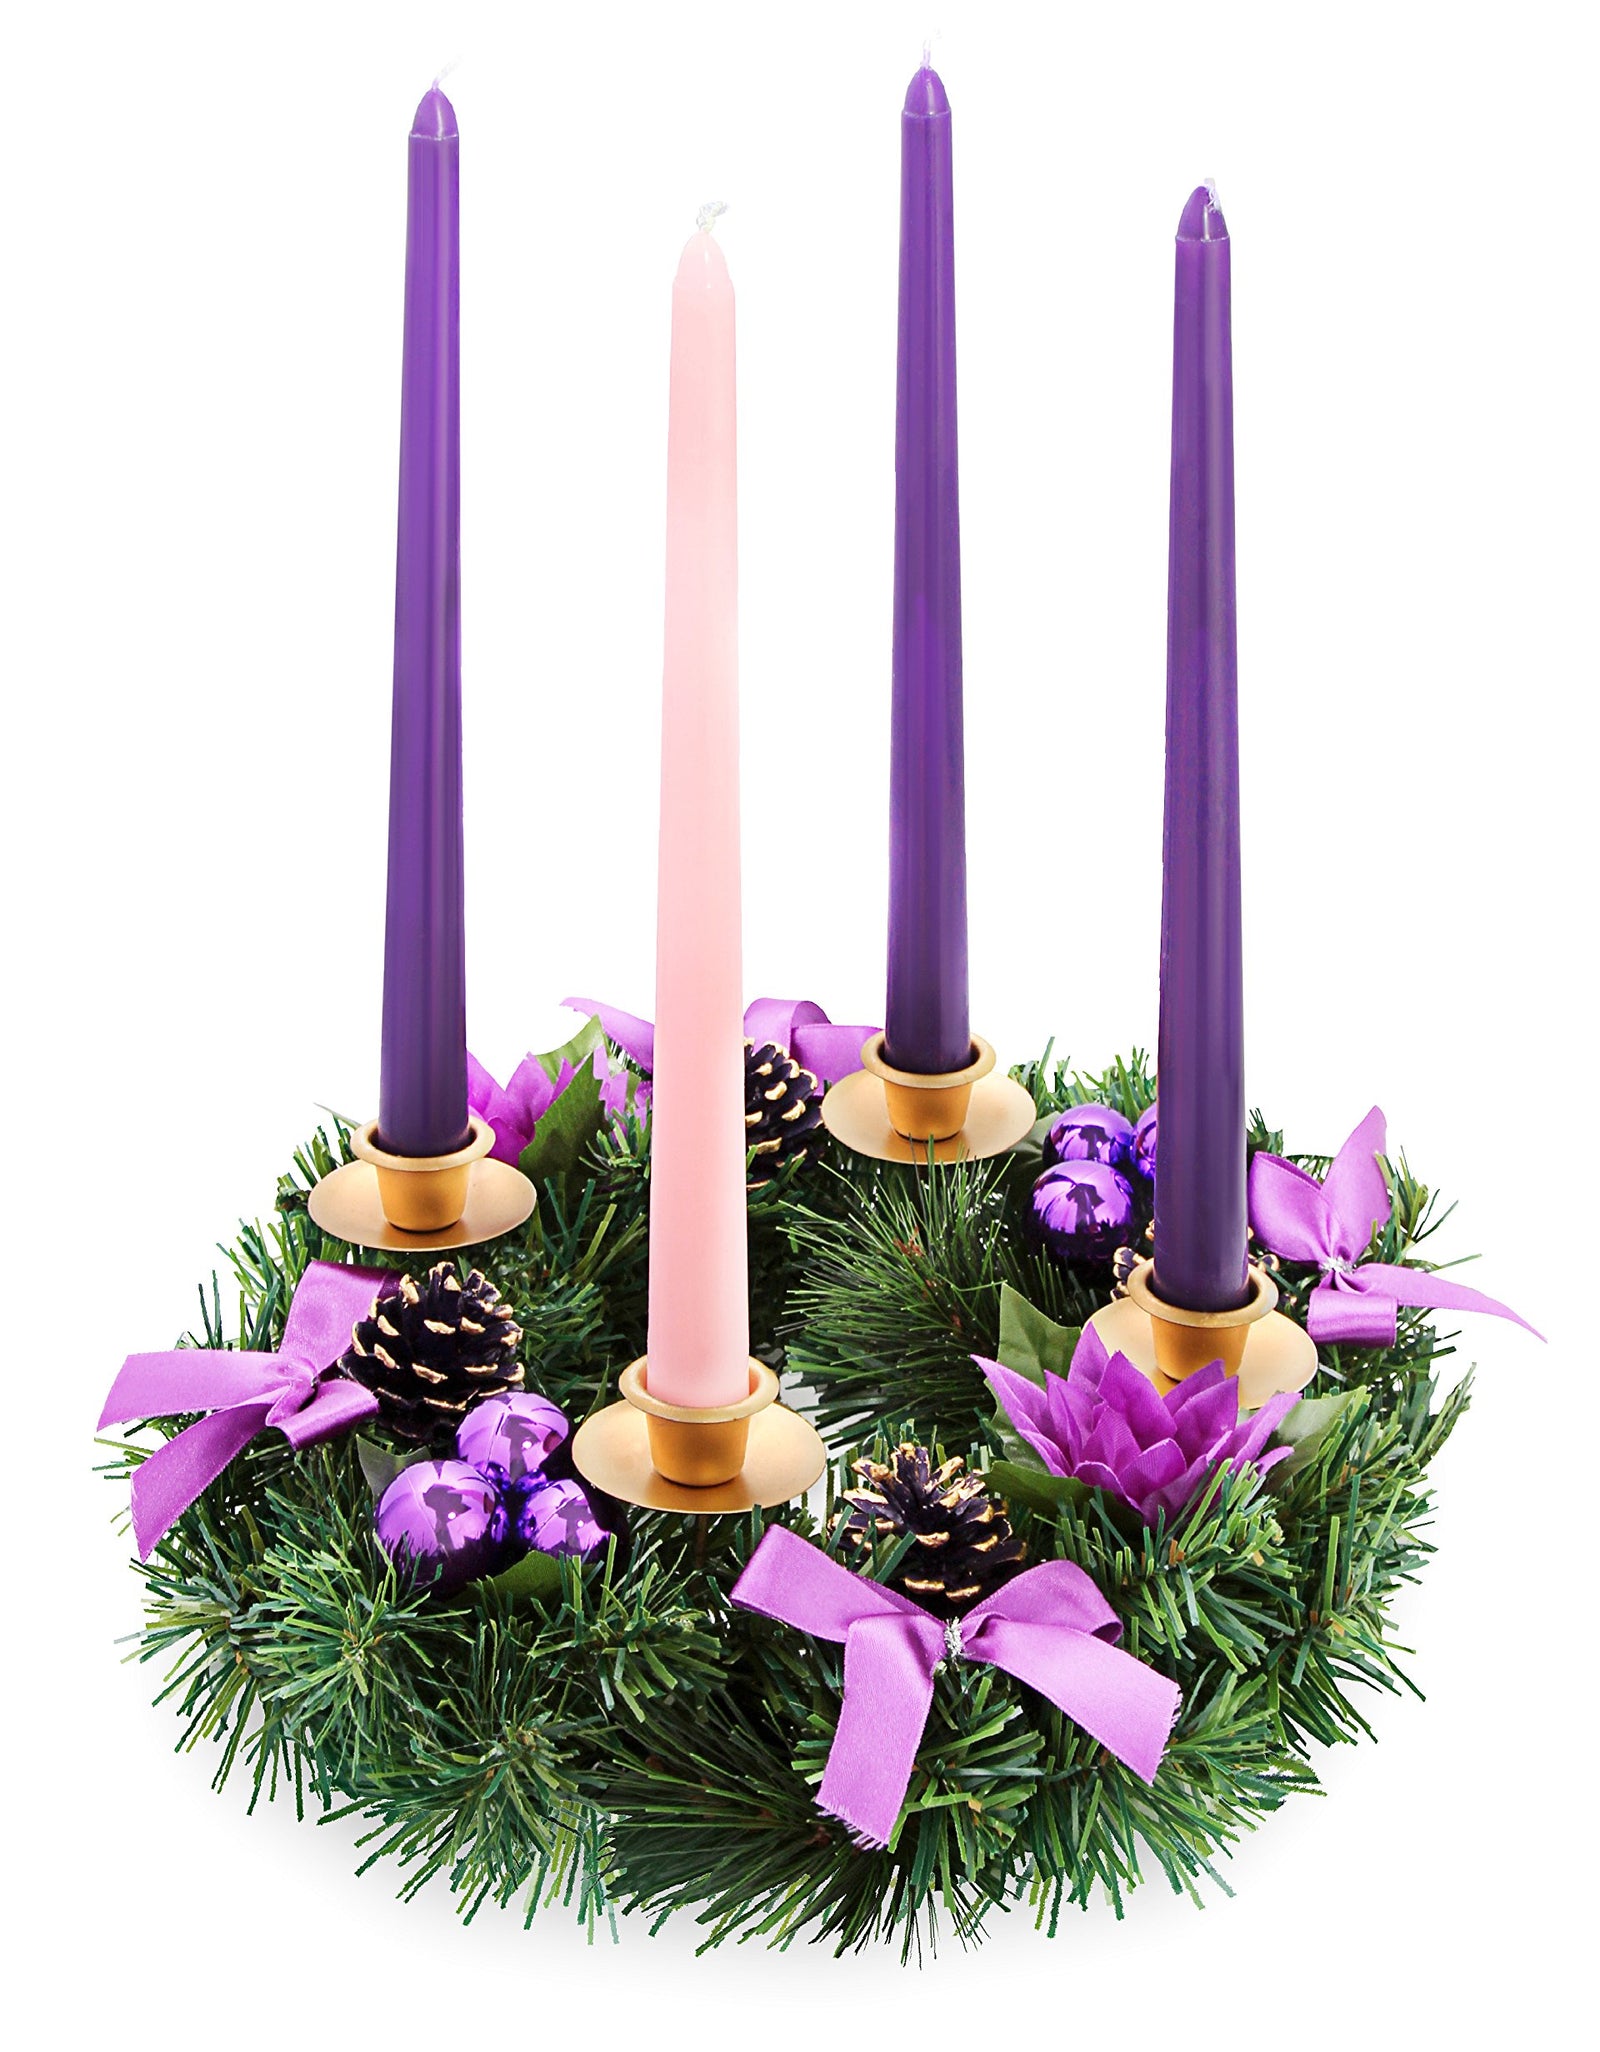 Advent Candle Set. "Made in the USA" Self Fitting End. Premium Hand Dipped Candles, Dripless, 4 pack - 3 purple, 1 pink